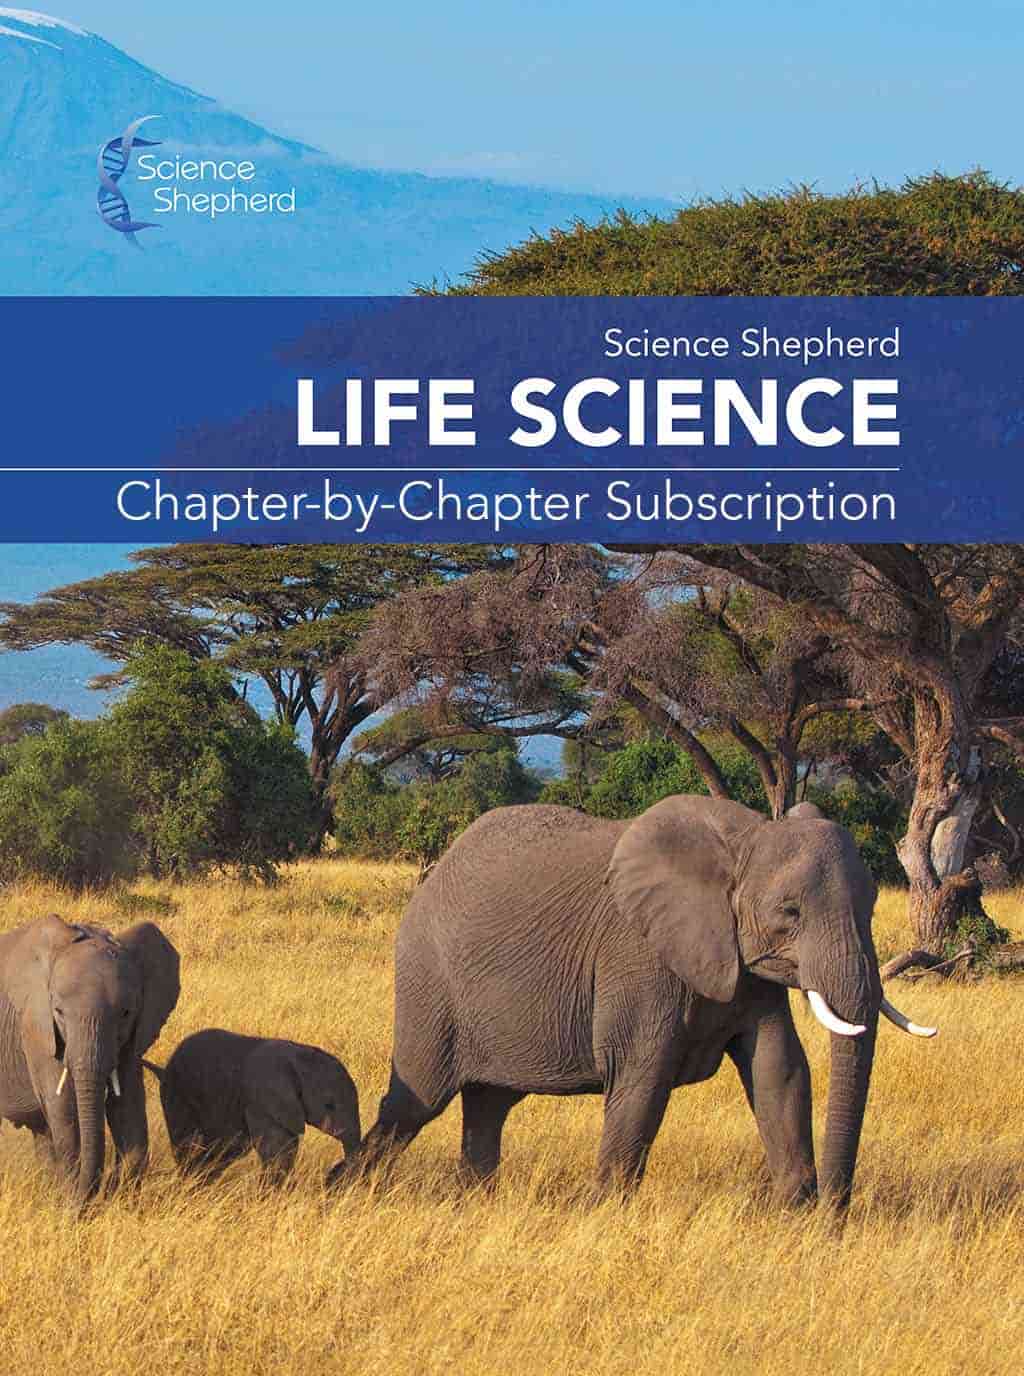 Life Science homeschool video curriculum chapter-by-chapter subscription cover of elephants